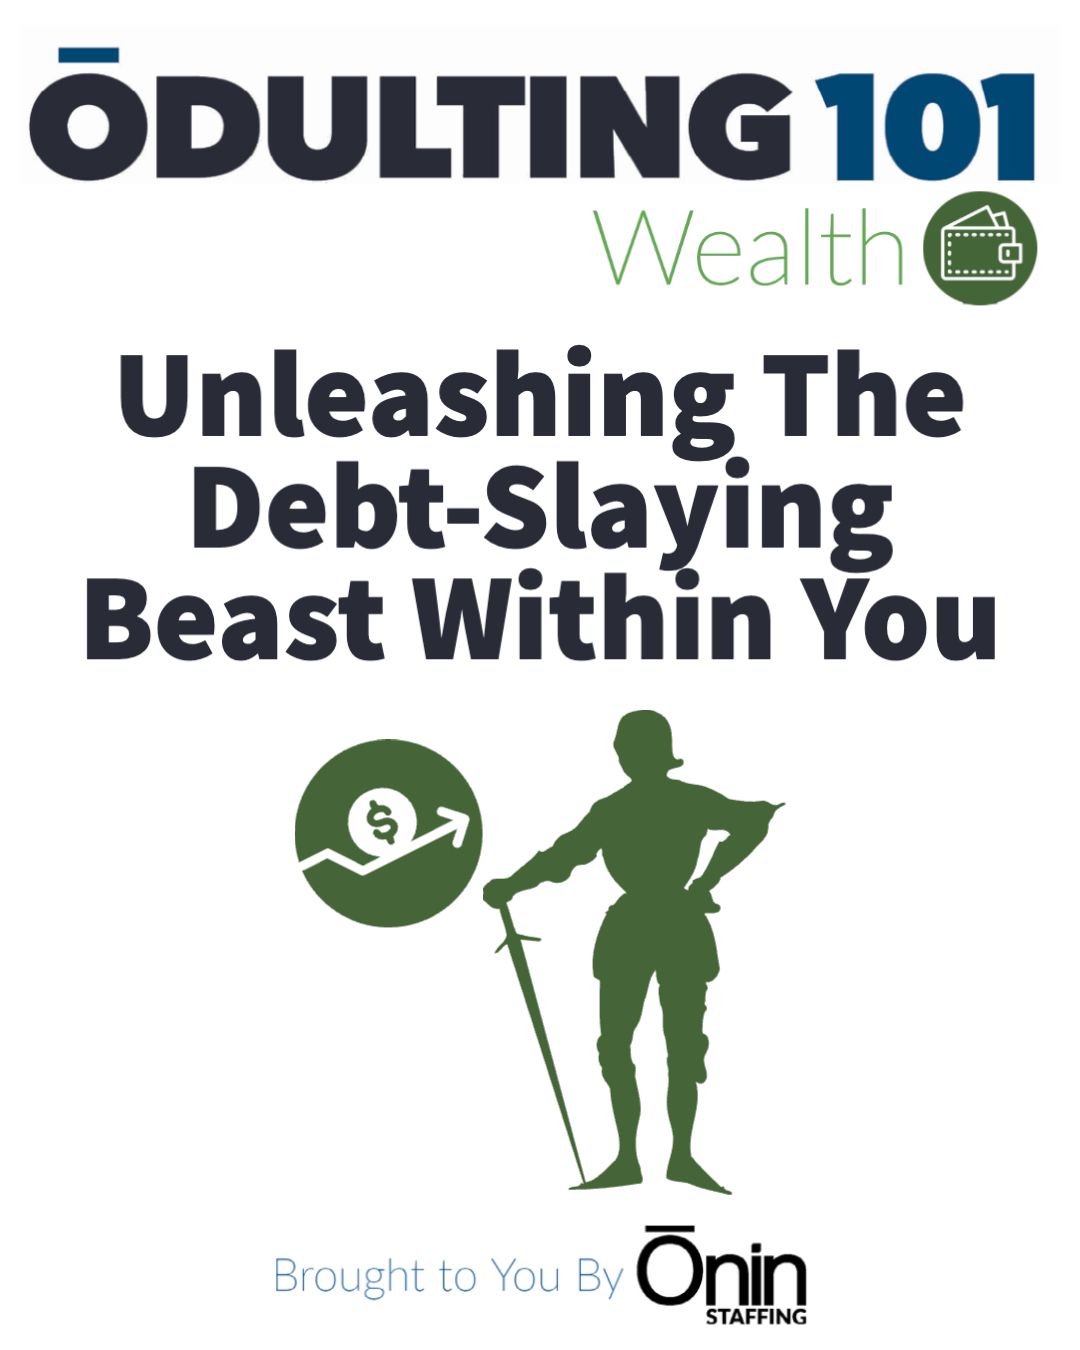 Knight in shining armor holding a sword, ready to slay the debt dragon, with a speech bubble representing debt, in the Odulting Wealth series blog post titled "Unleashing The Debt Slaying Beast Within You."